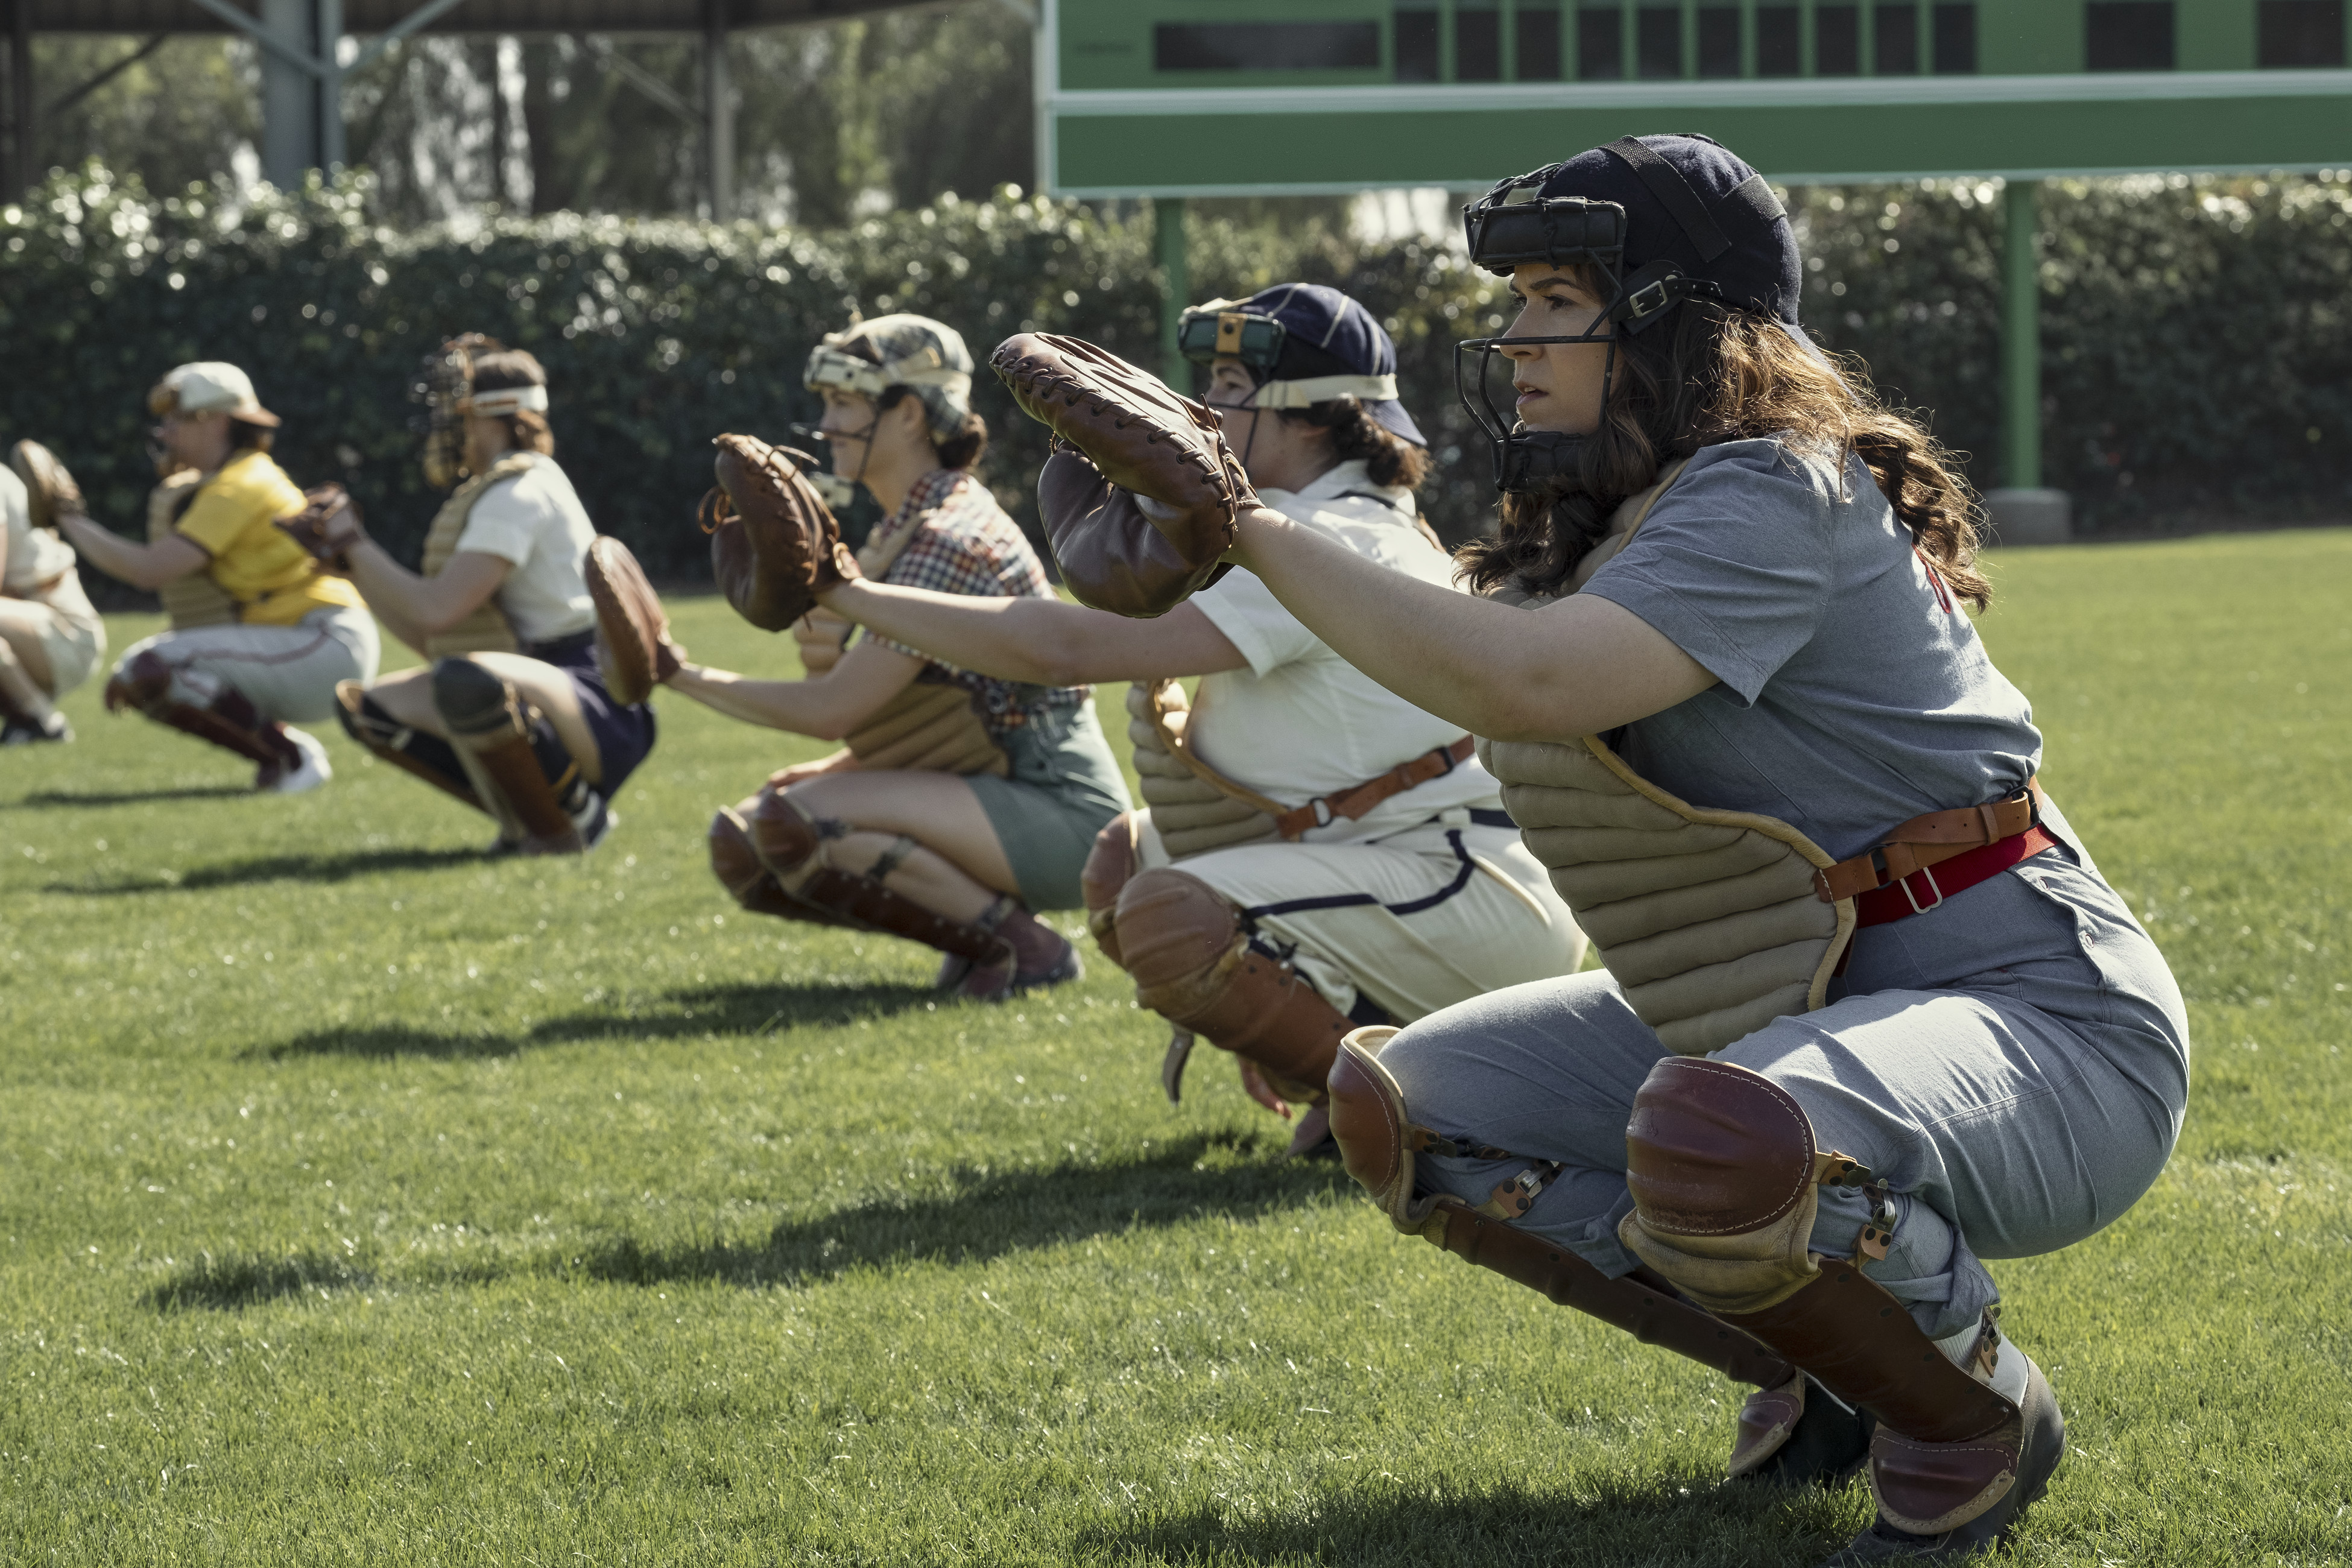 A scene from Amazon's upcoming 'A League of their Own' series